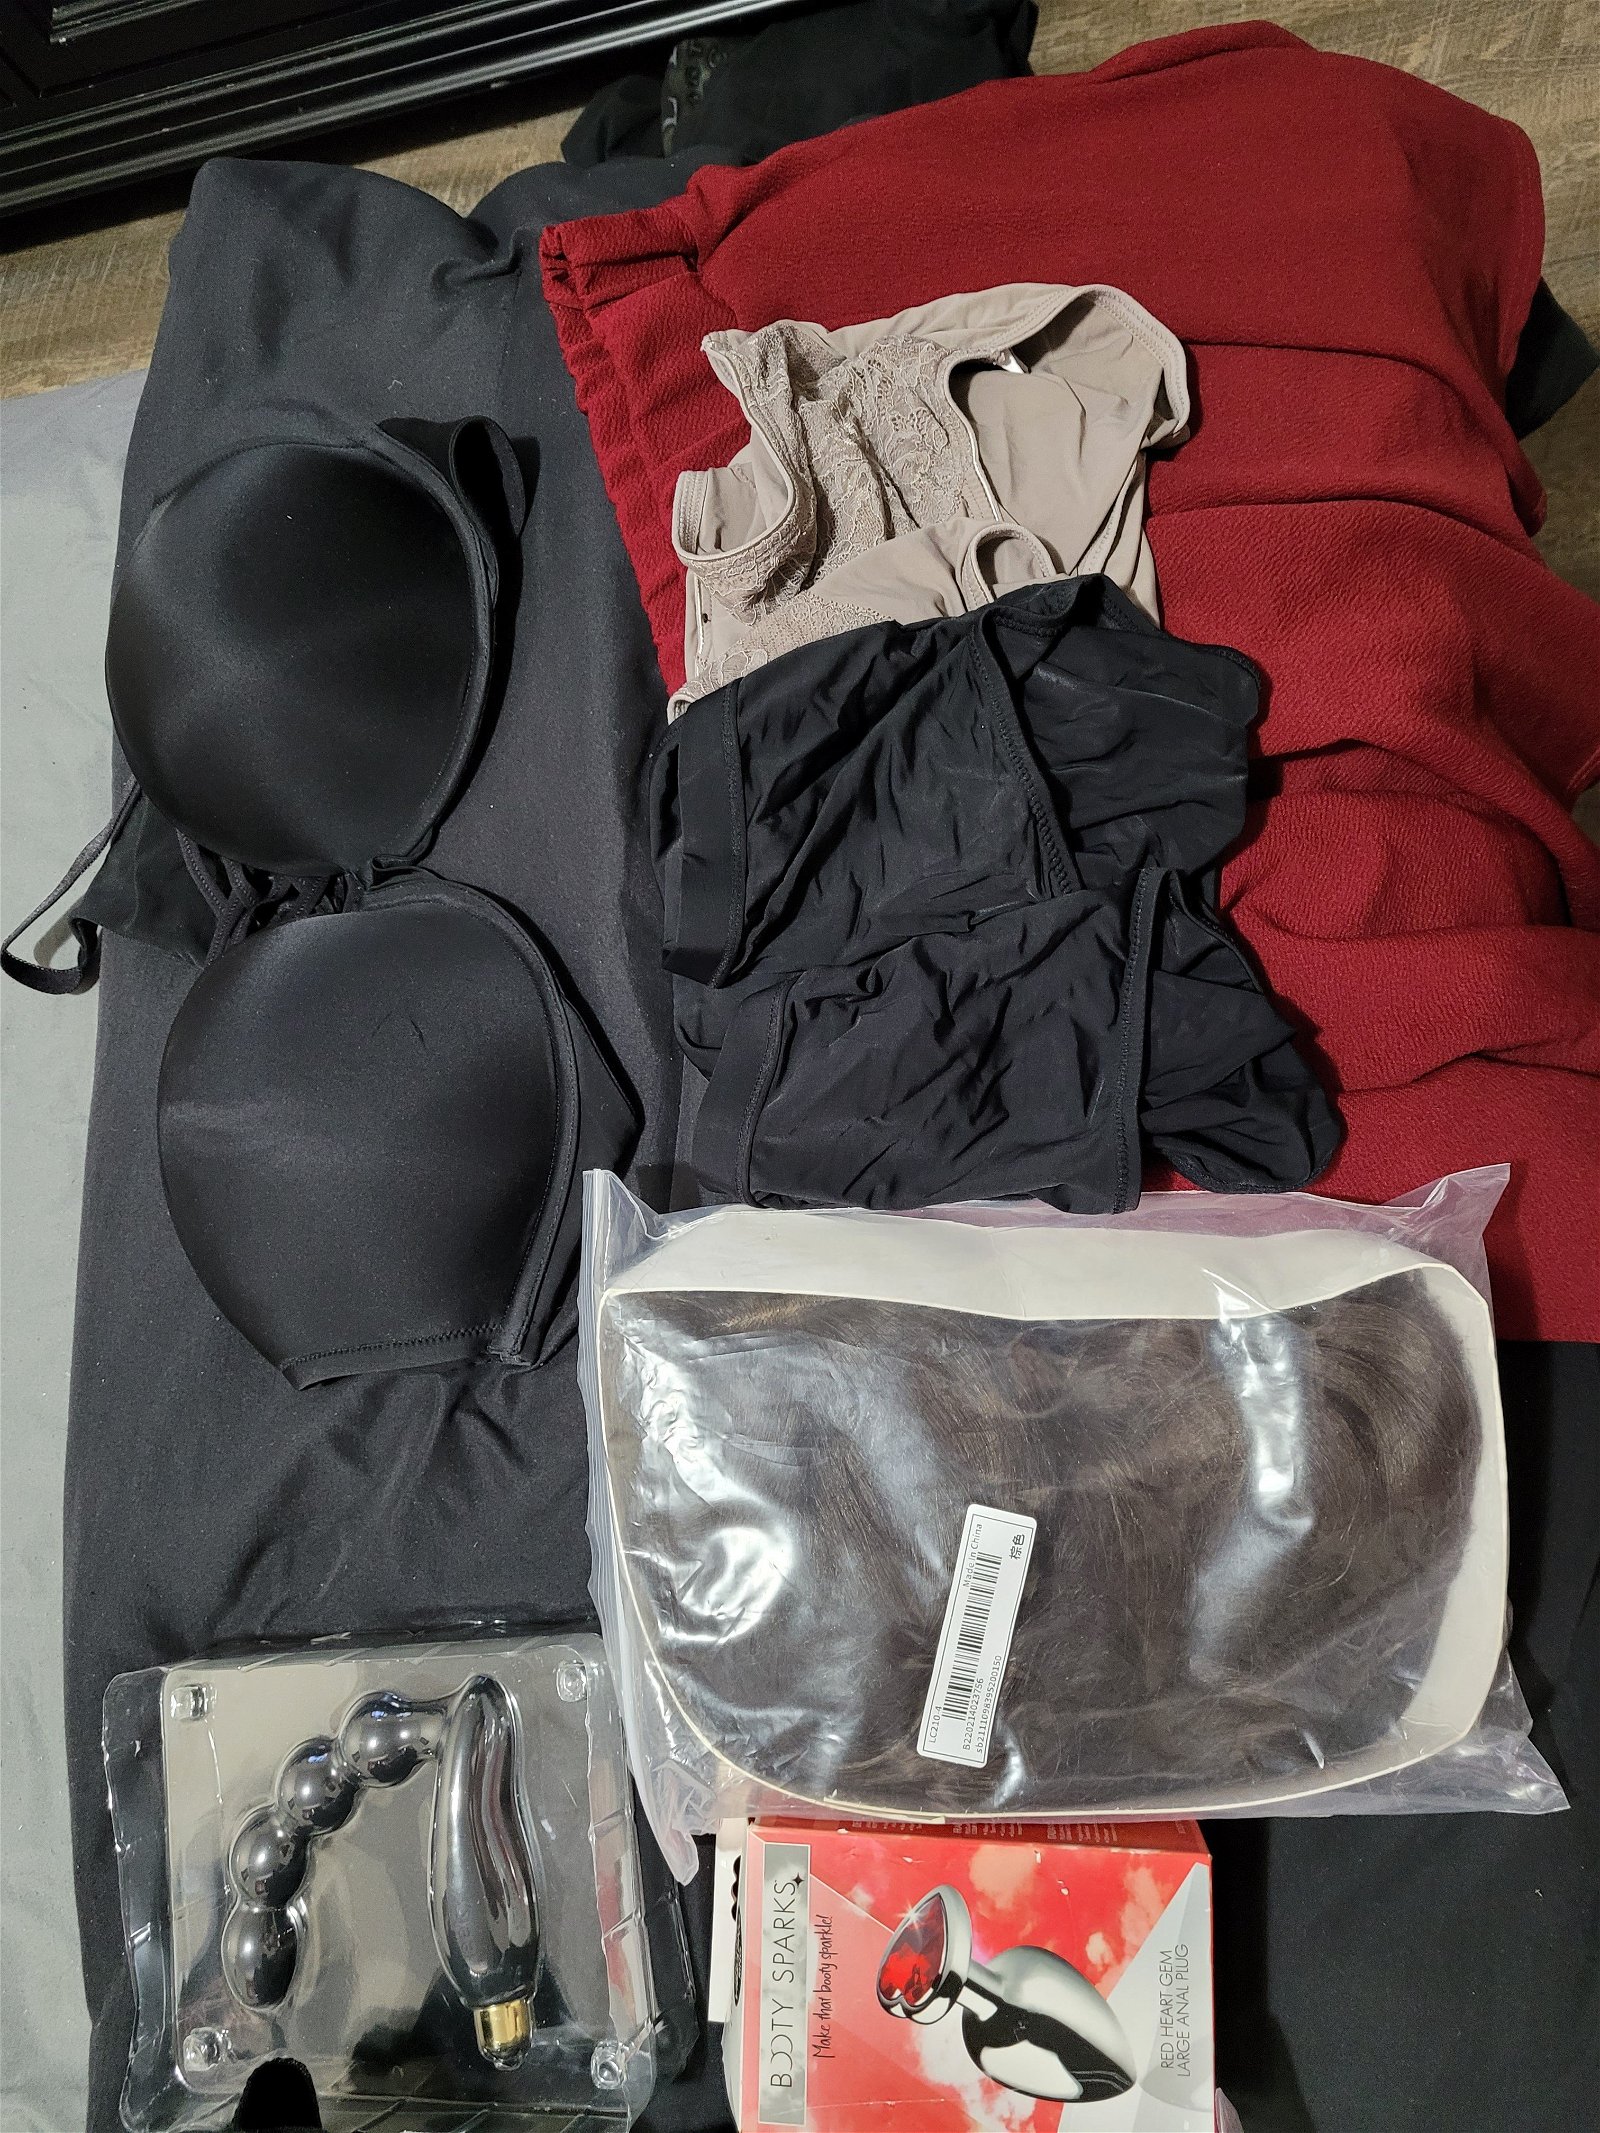 Photo by MySissyParadise with the username @MySissyParadise,  June 3, 2022 at 1:05 PM. The post is about the topic Sissy and the text says 'feeling very horny right now thinking of drssing up and having fun with some toys :).. tones more tucked away in closet hehe
#me #toys #bra #panties #skirt #wig #sissy #lingerie #dressingup #horny'